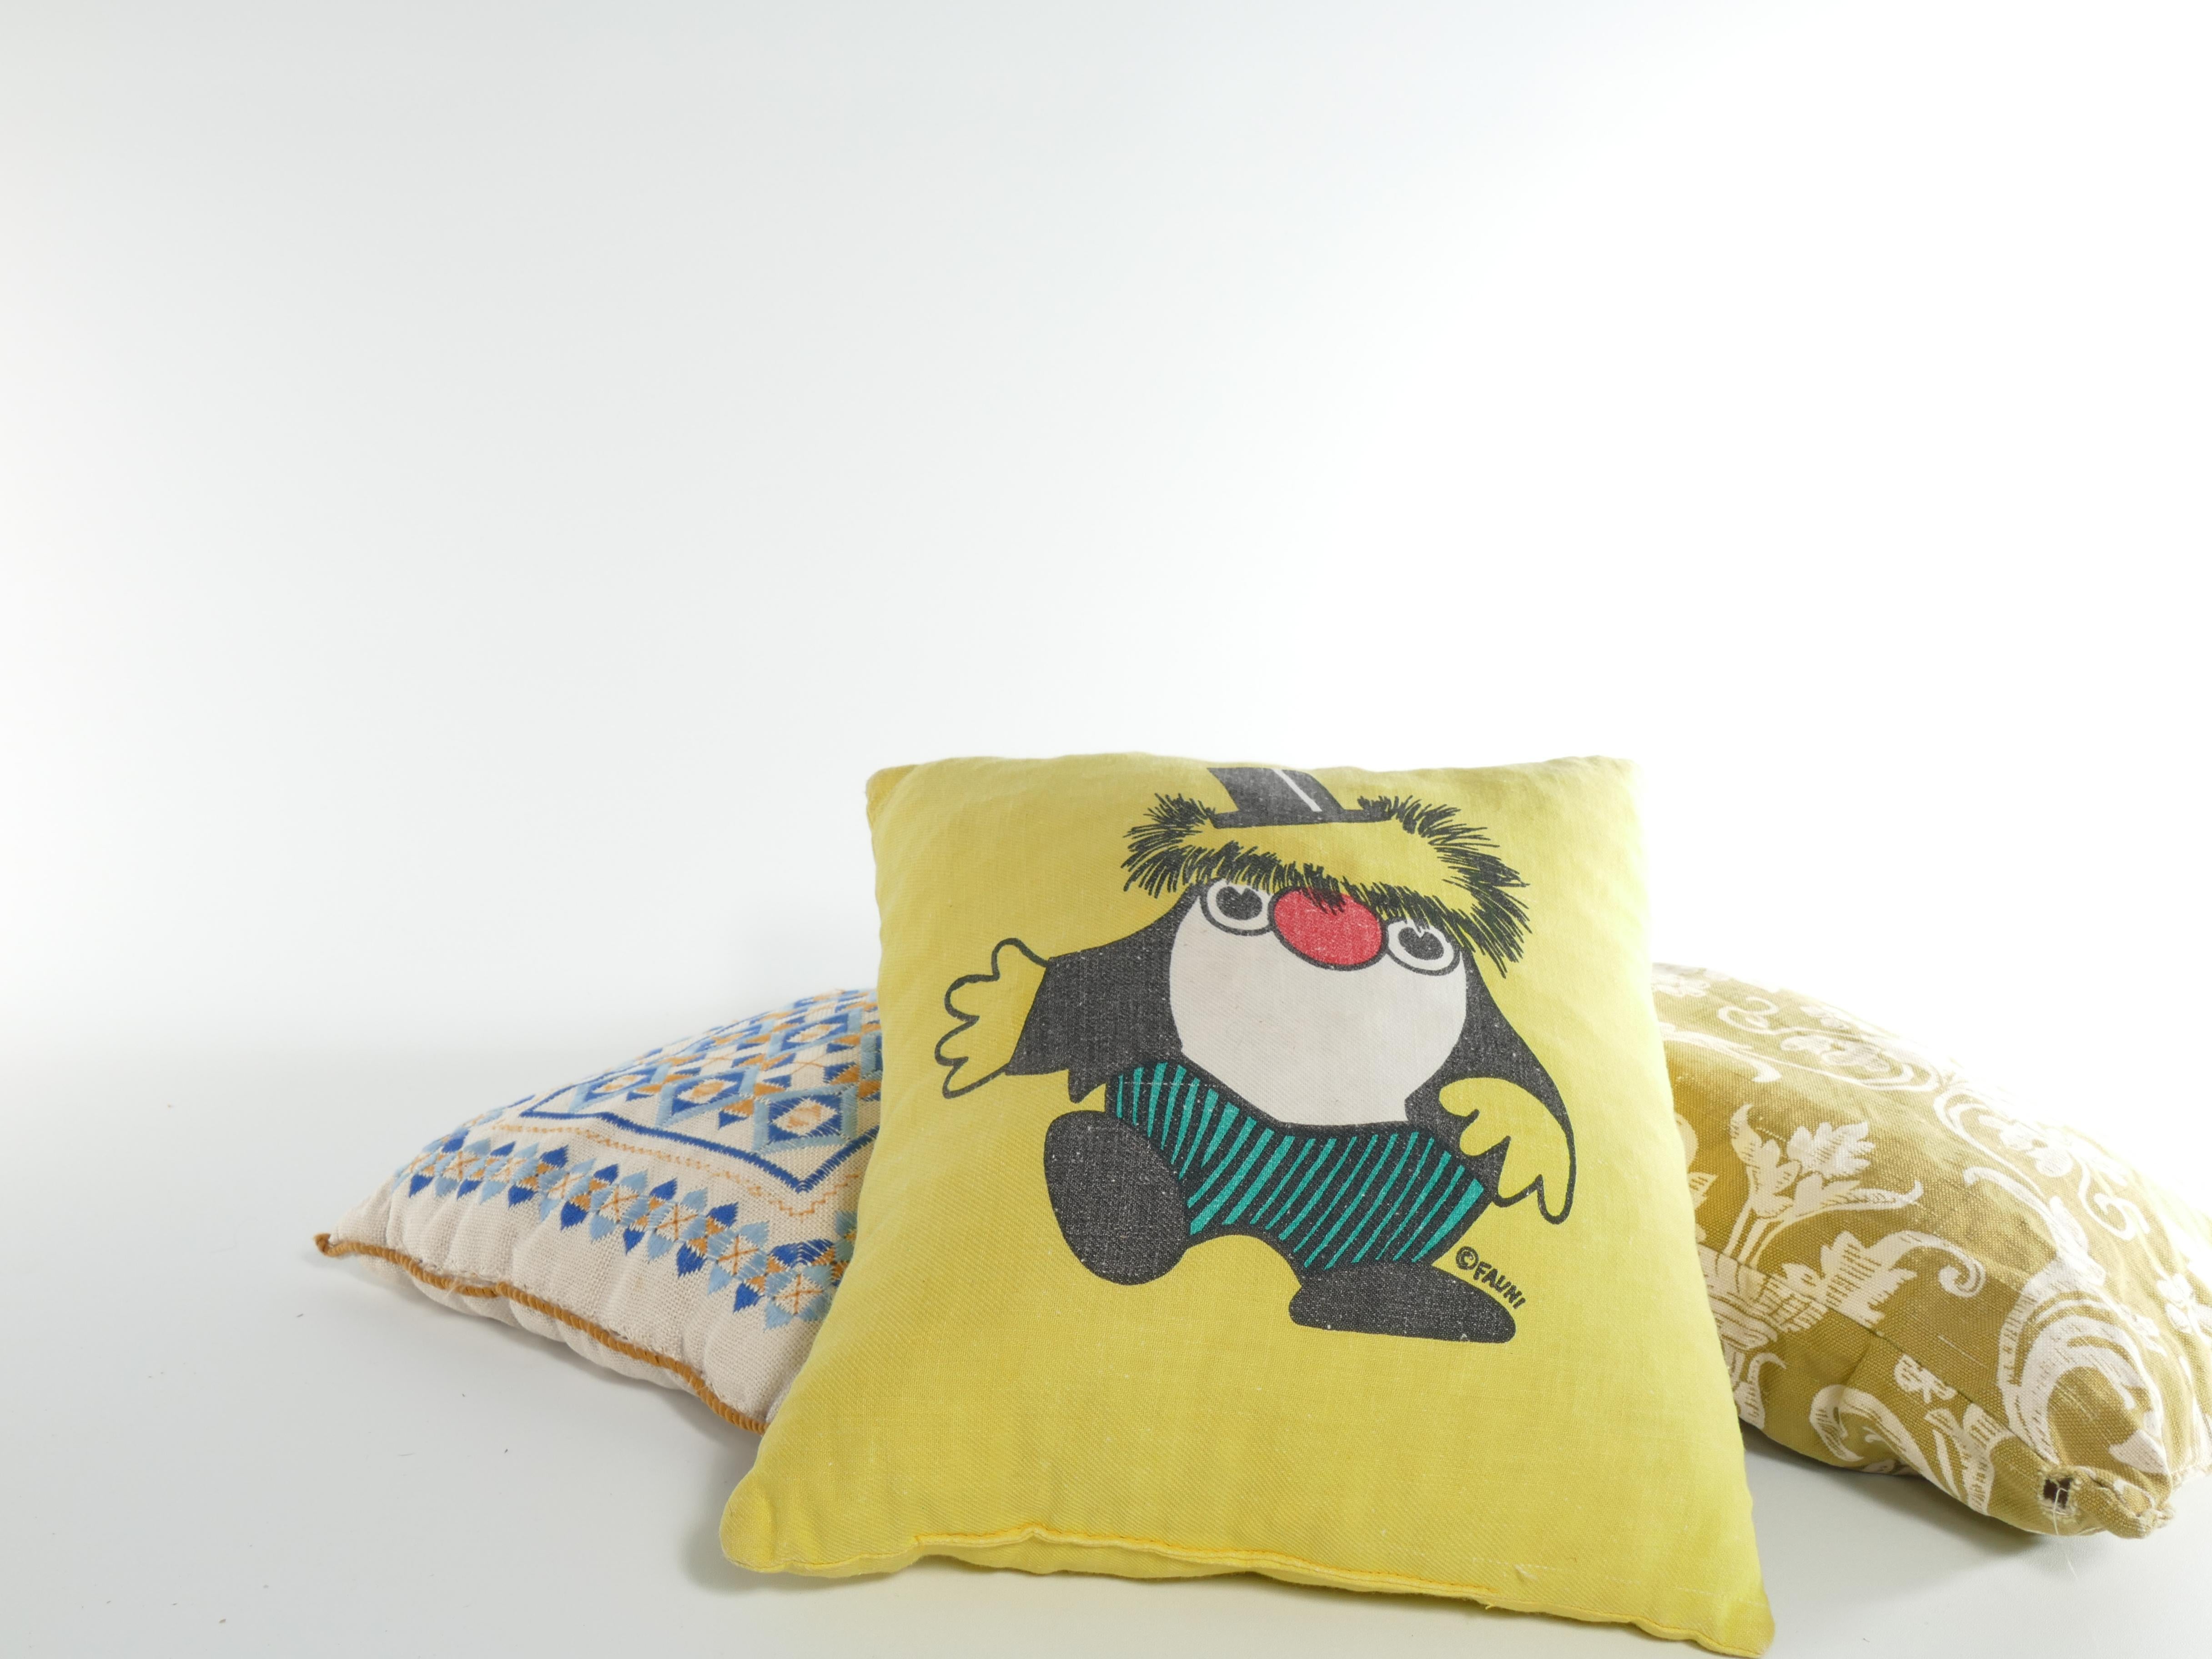 1970’s Atelier Fauni Yellow  Pillow Depicting Mr Edward the Business Troll  For Sale 2